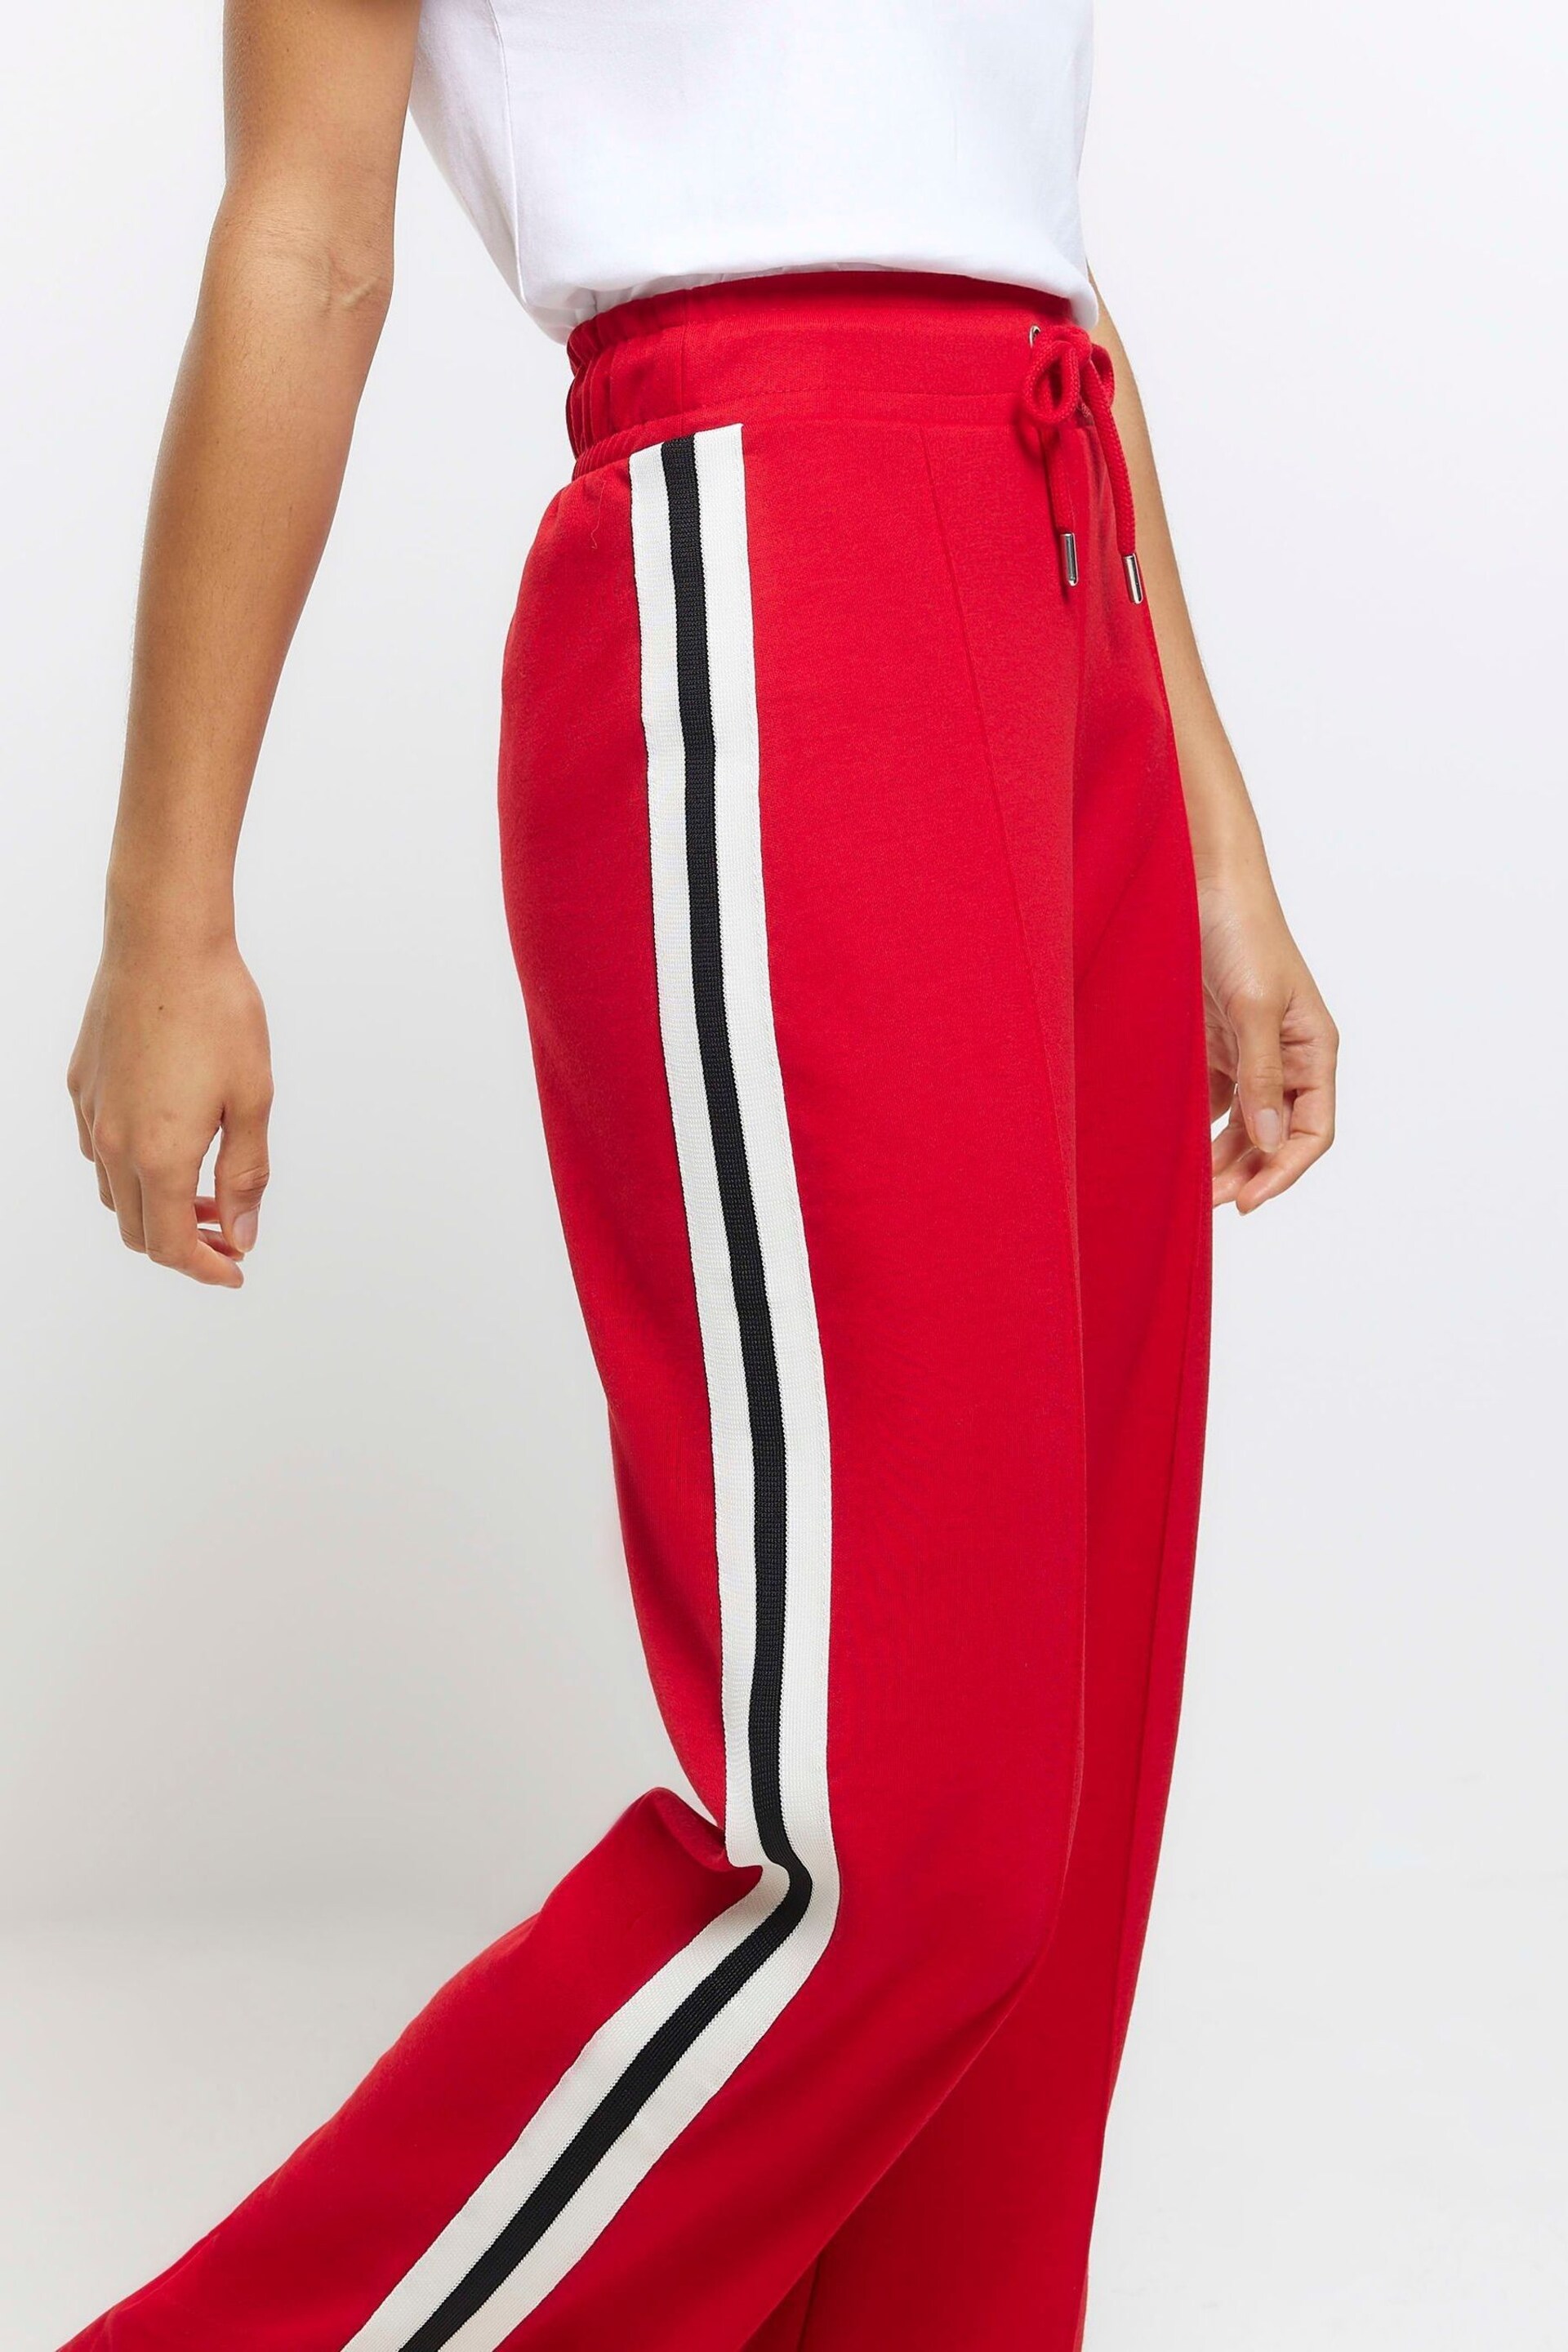 River Island Red Casual Wide Leg Side Stripe Joggers - Image 4 of 5